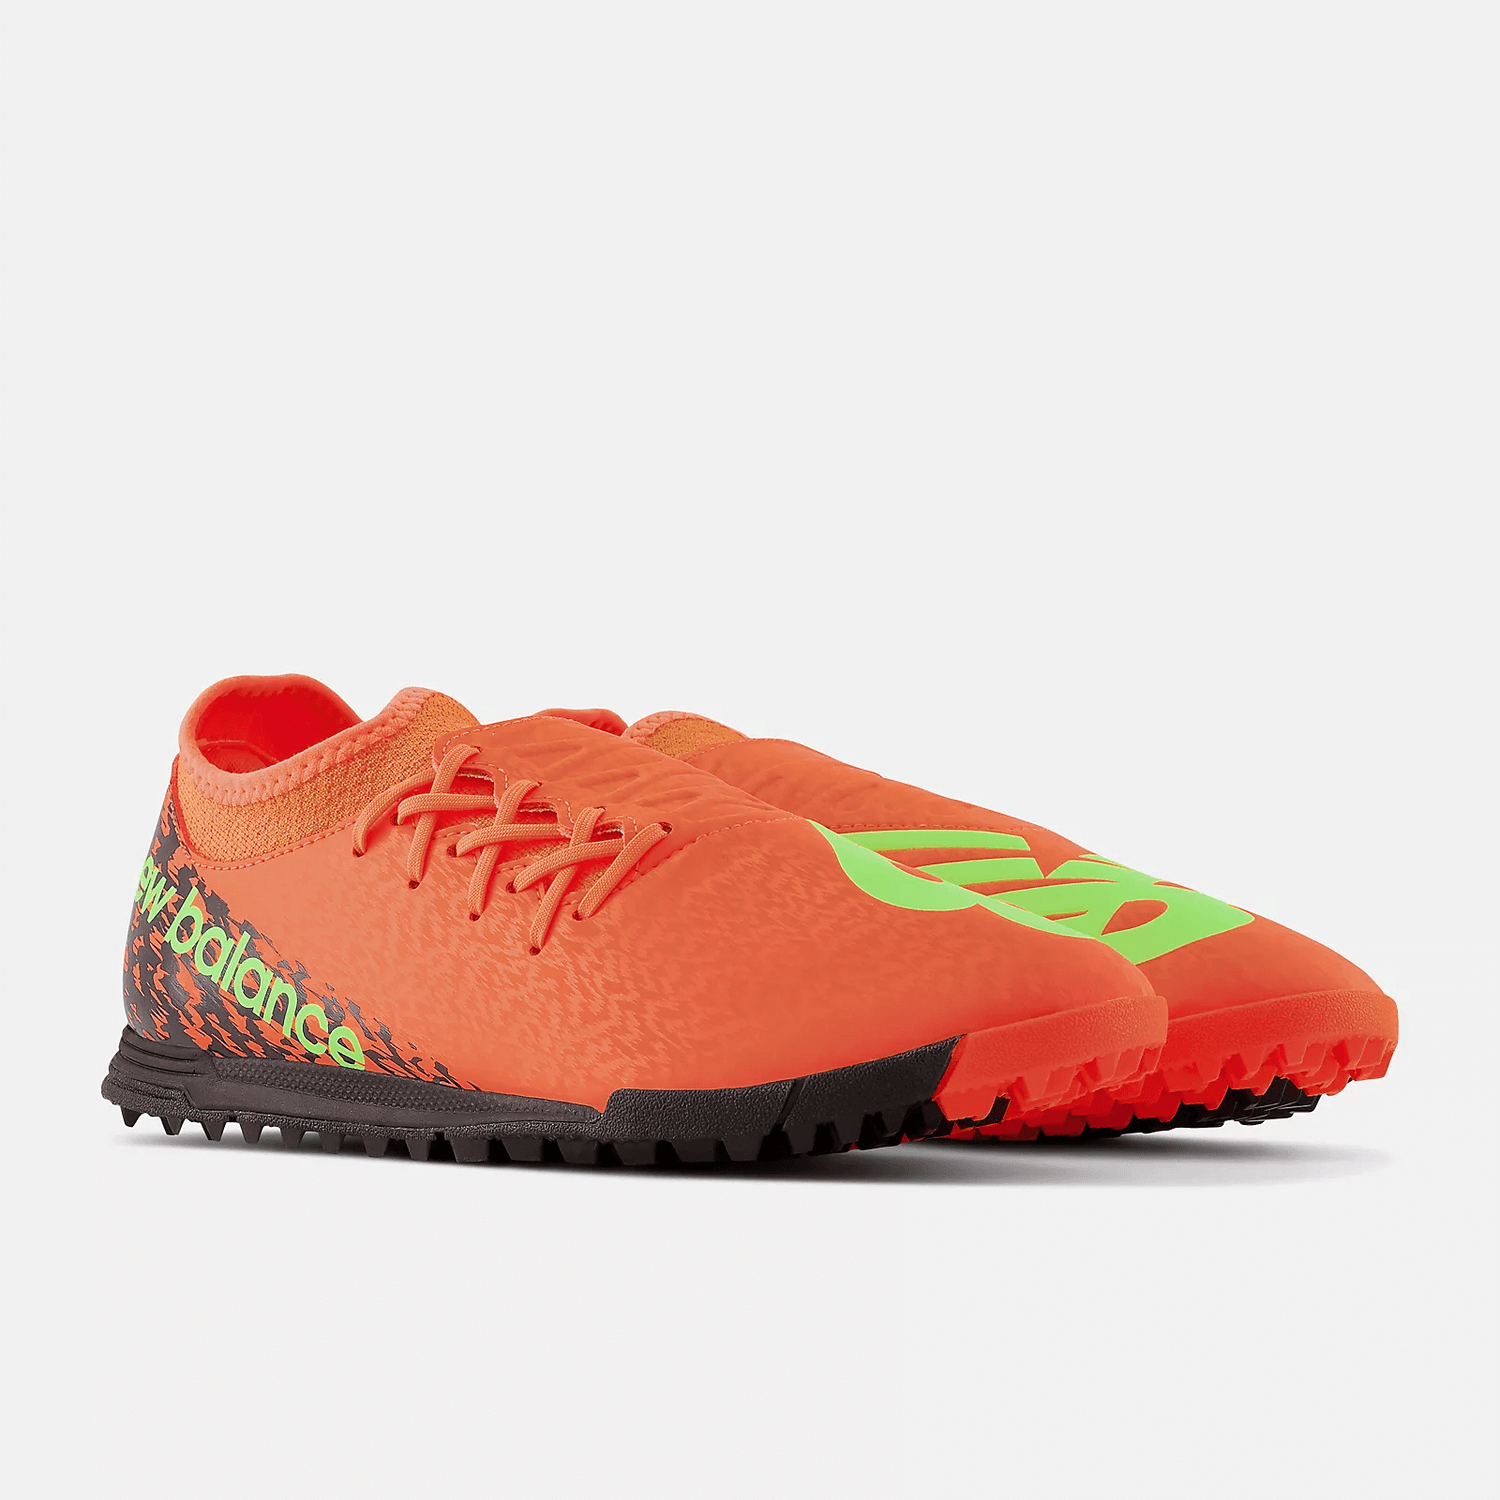 New Balance Furon v7 Dispatch Turf 2E Wide - Dizzy Heights Pack (SP23) (Pair - Lateral)